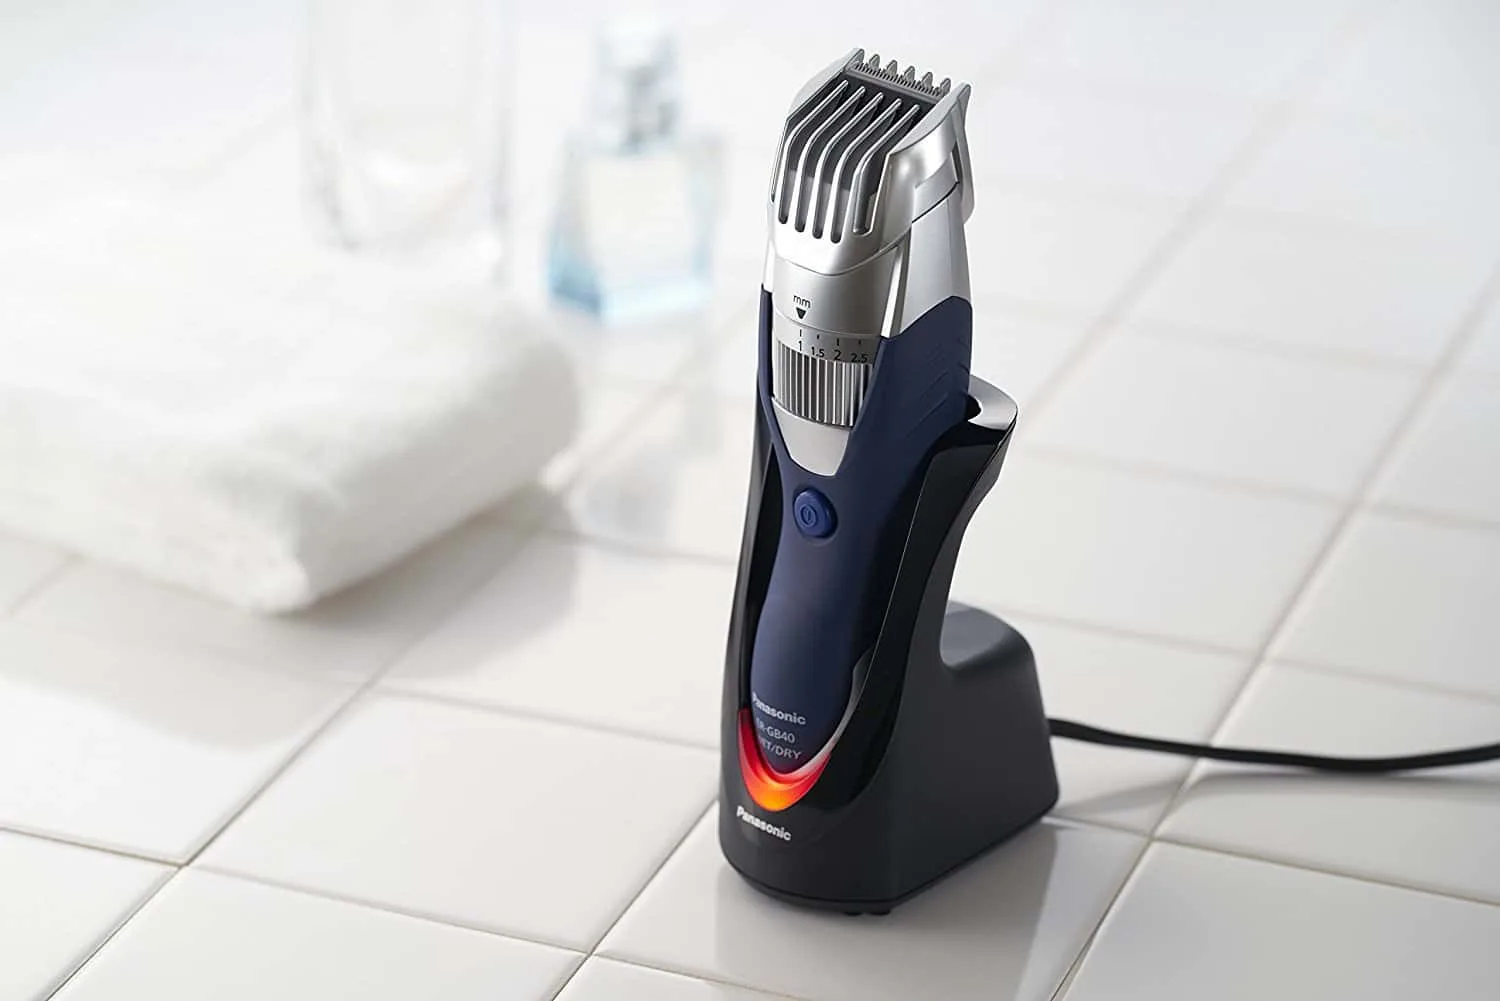 Panasonic Milano All-in-One Trimmer, ER-GB40-S